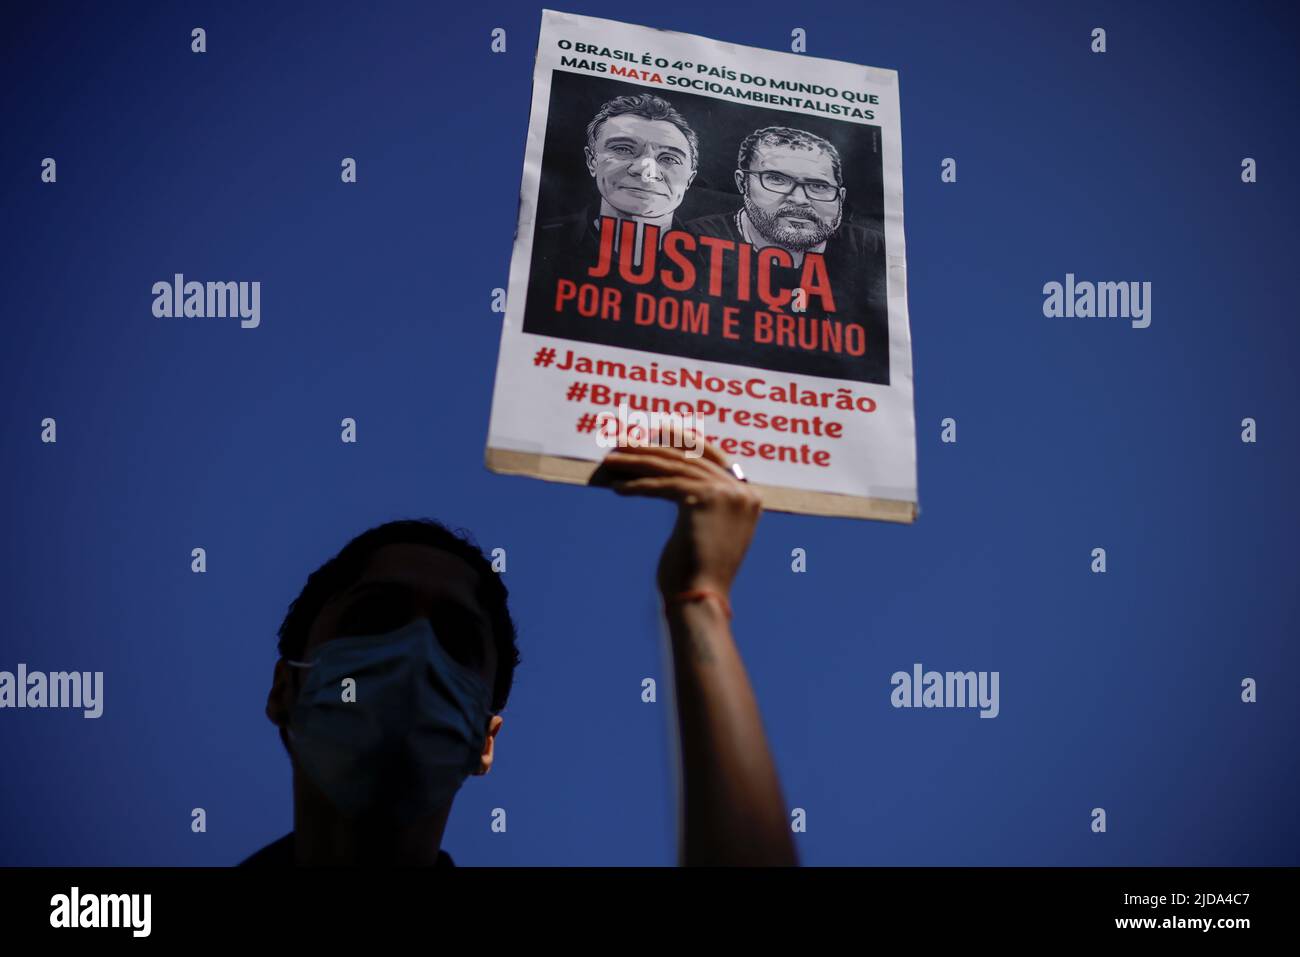 A demonstrator holds a sign during a protest, to demand justice for journalist Dom Phillips and indigenous expert Bruno Pereira, who were murdered in the Amazon, in Brasilia, Brazil June 19, 2022. REUTERS/Ueslei Marcelino Stock Photo